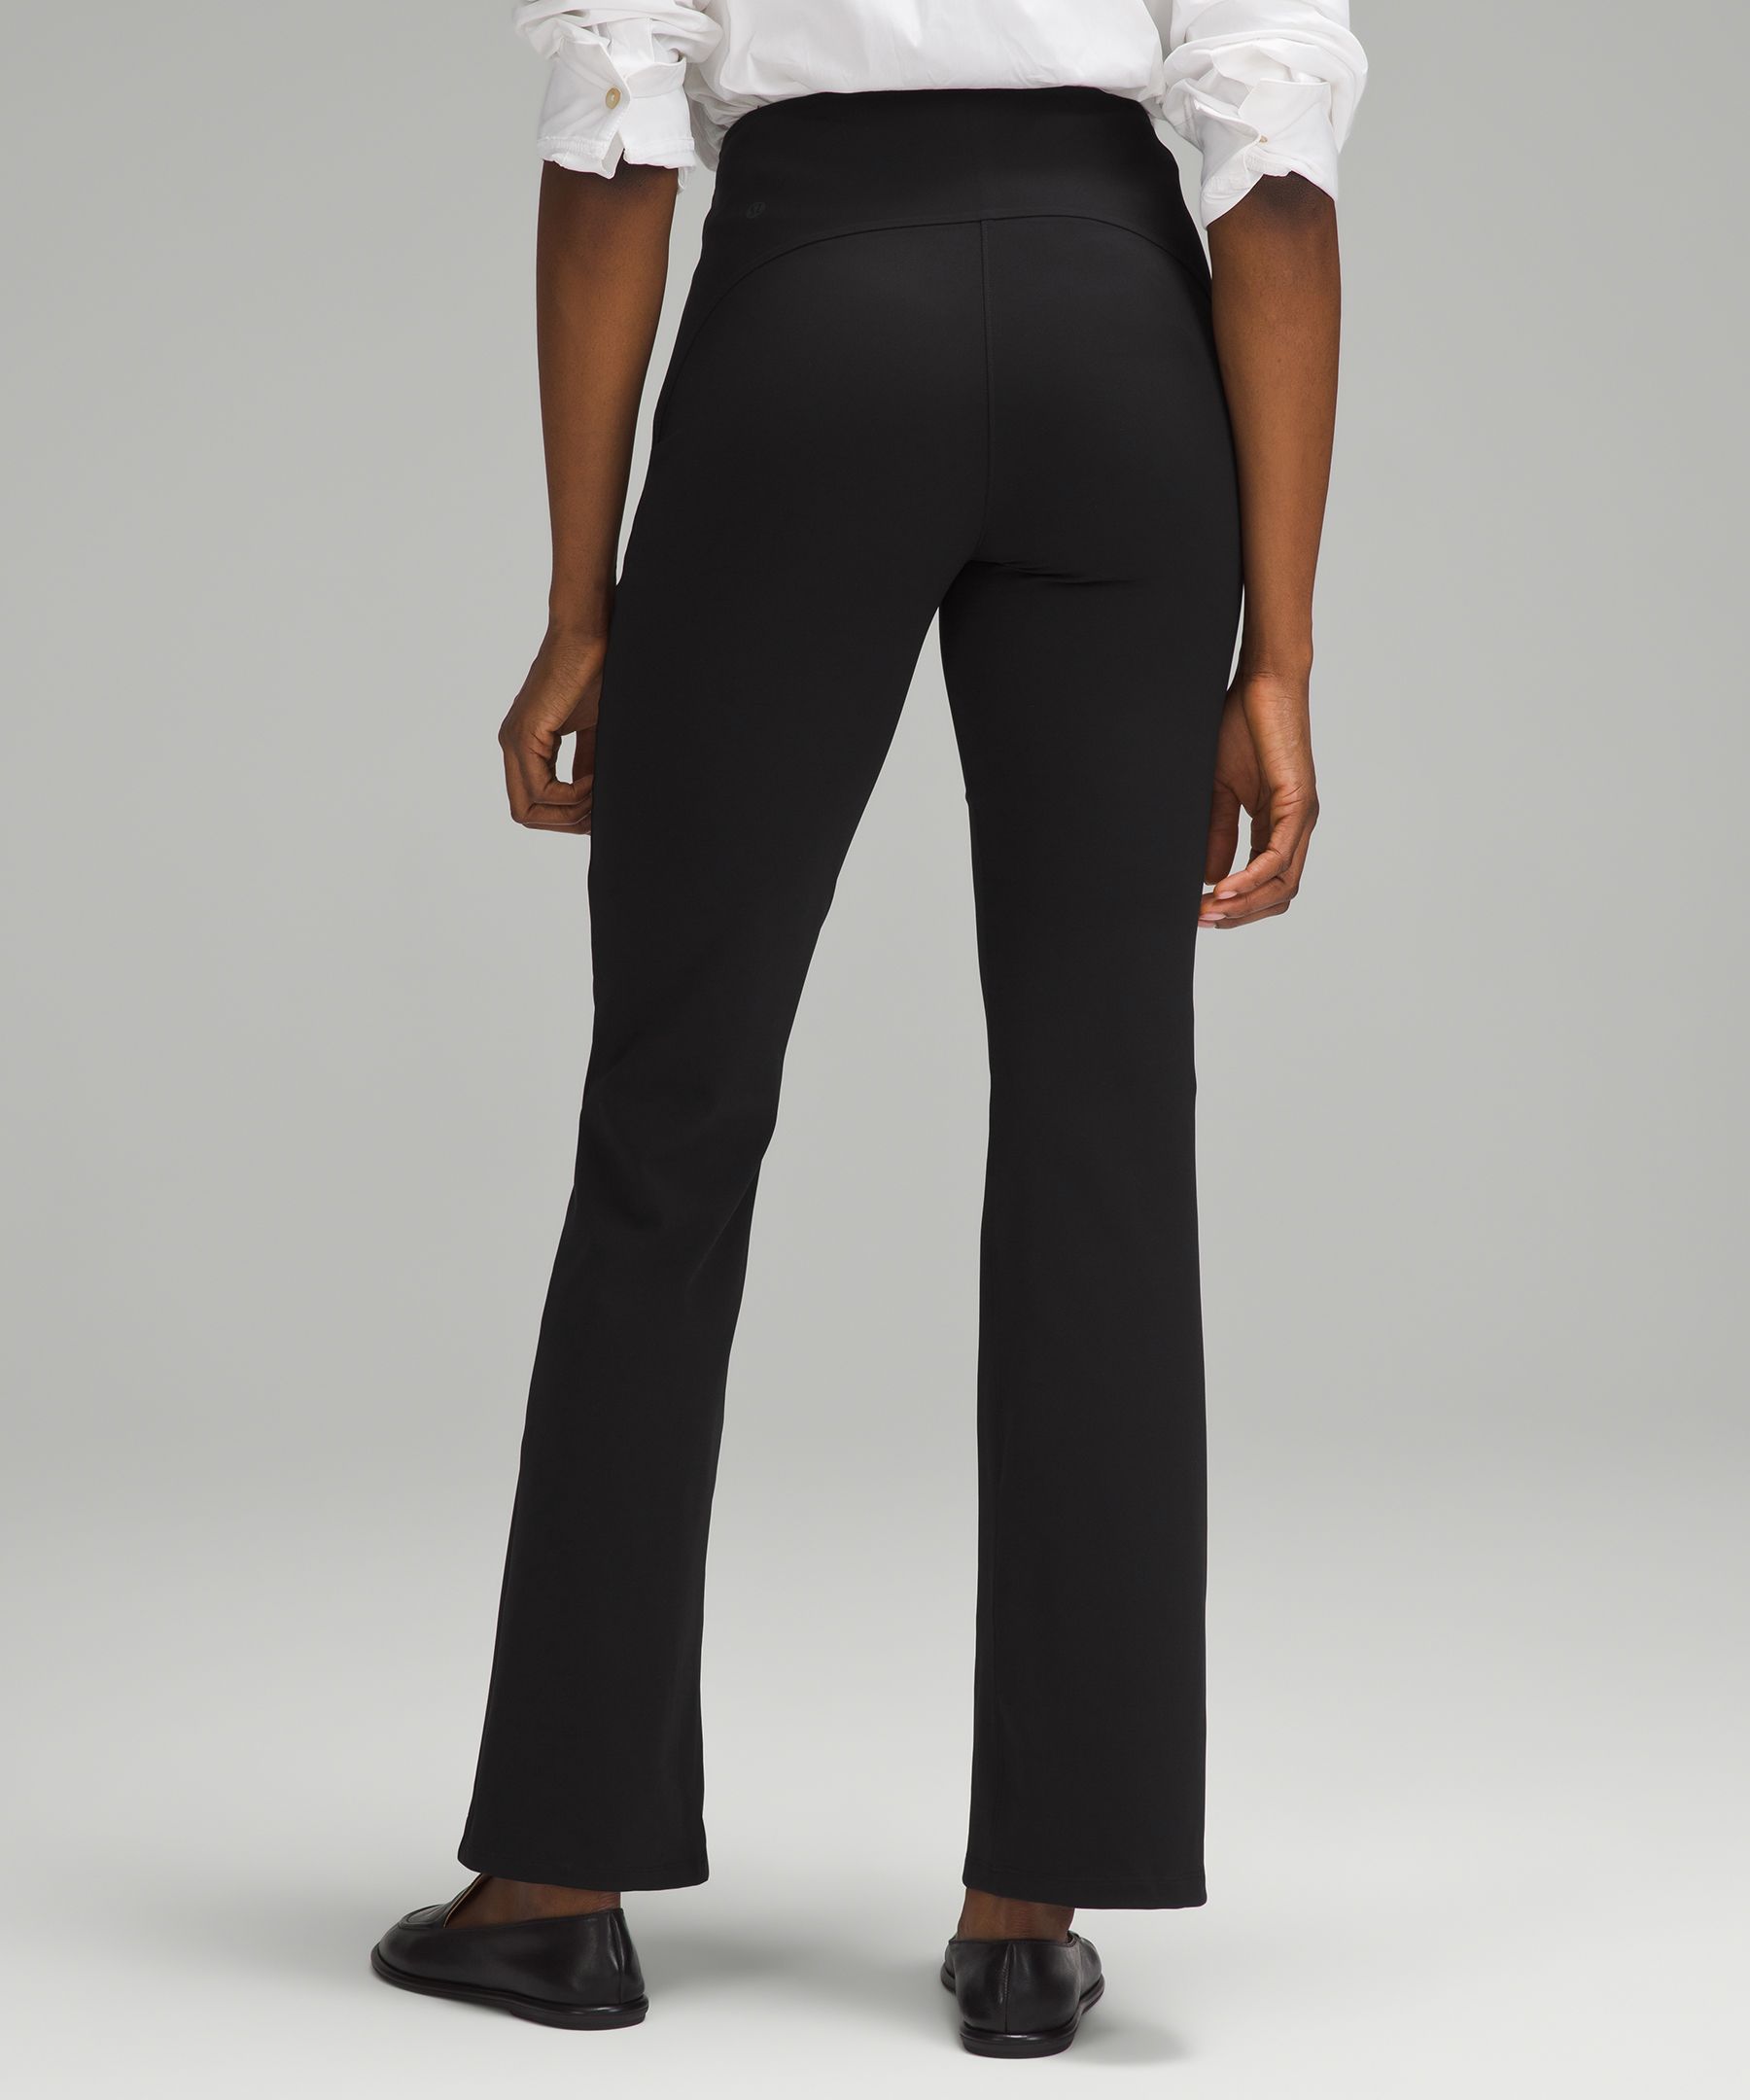 Smooth Fit Pull-On High-Rise Pant | Trousers | Lululemon UK